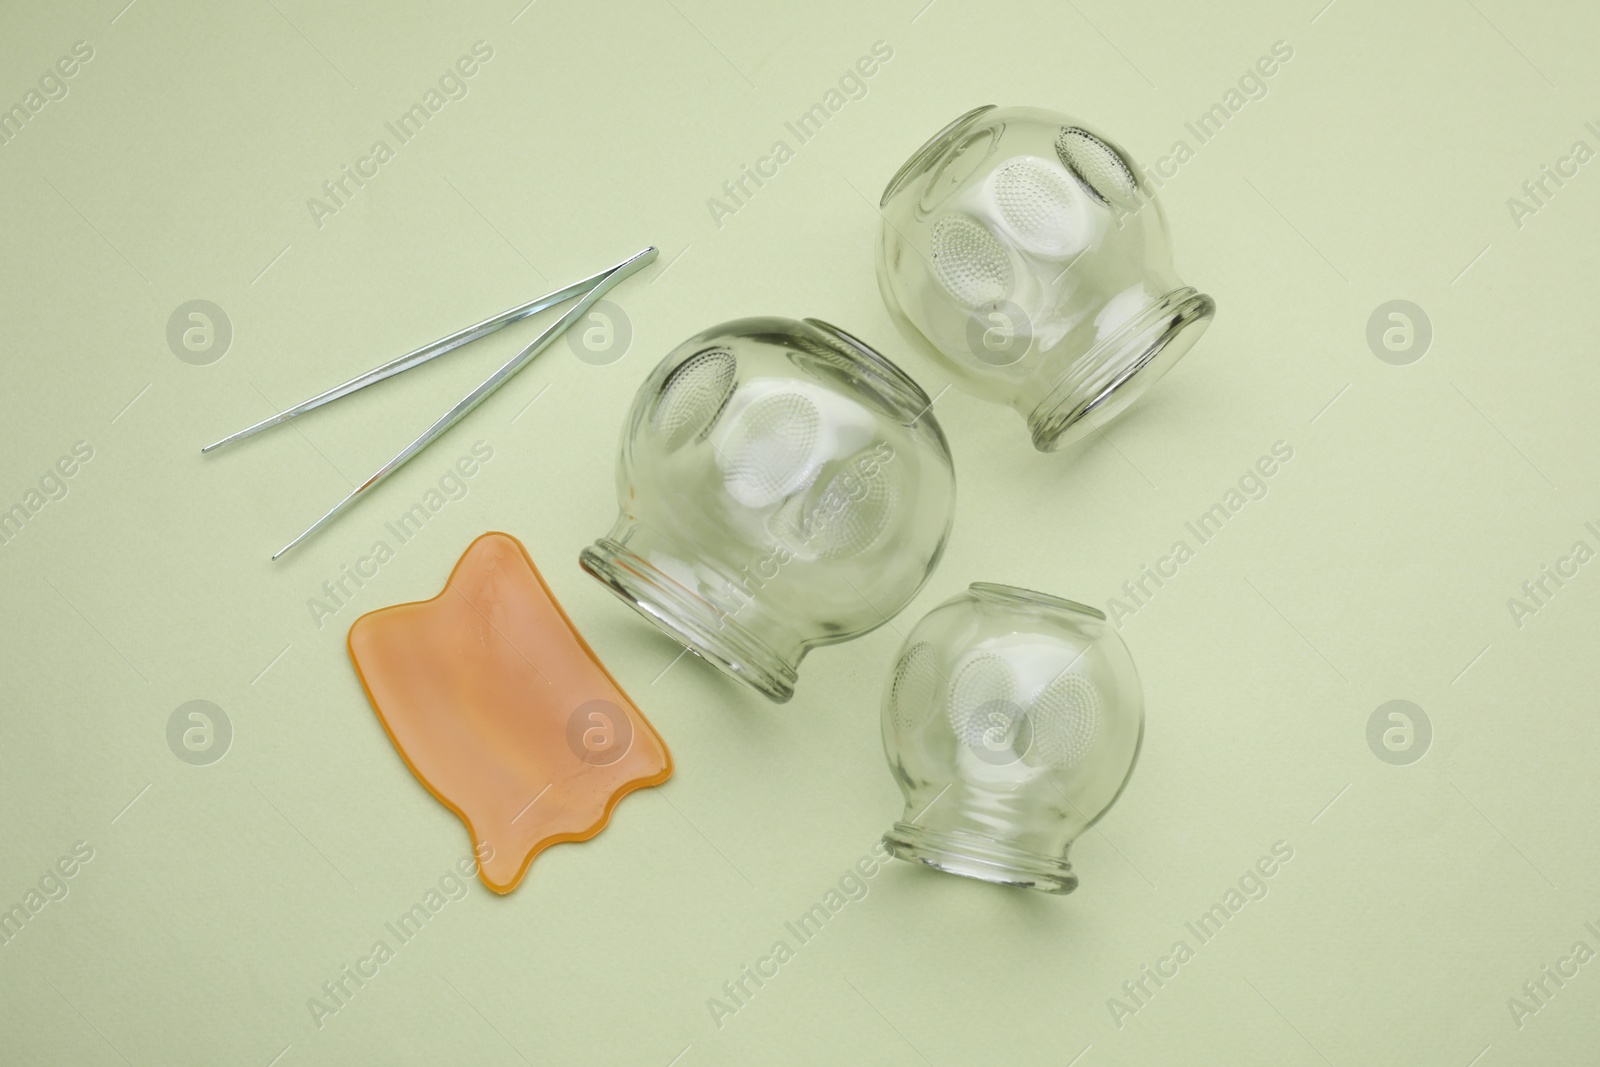 Photo of Glass cups, gua sha and tweezers on light olive background, flat lay. Cupping therapy